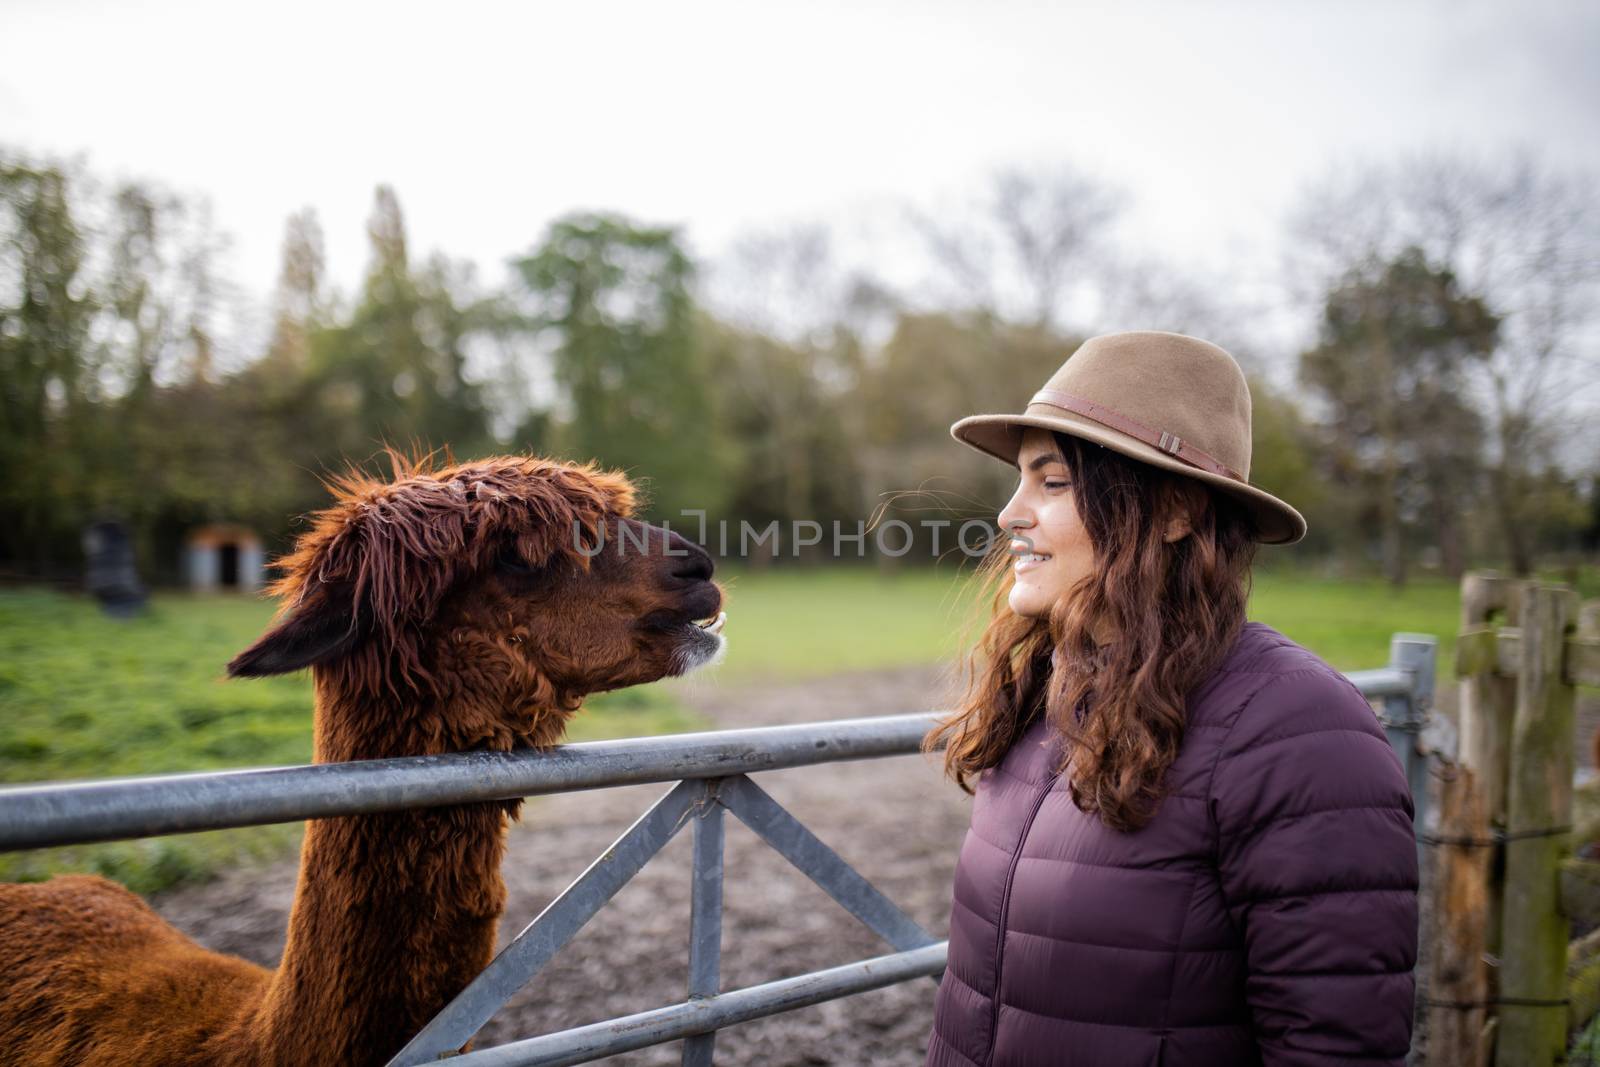 Smiling brunette woman wearing a hat looking at the brown alpaca next to her, with a blurry forest and cloudy sky as background